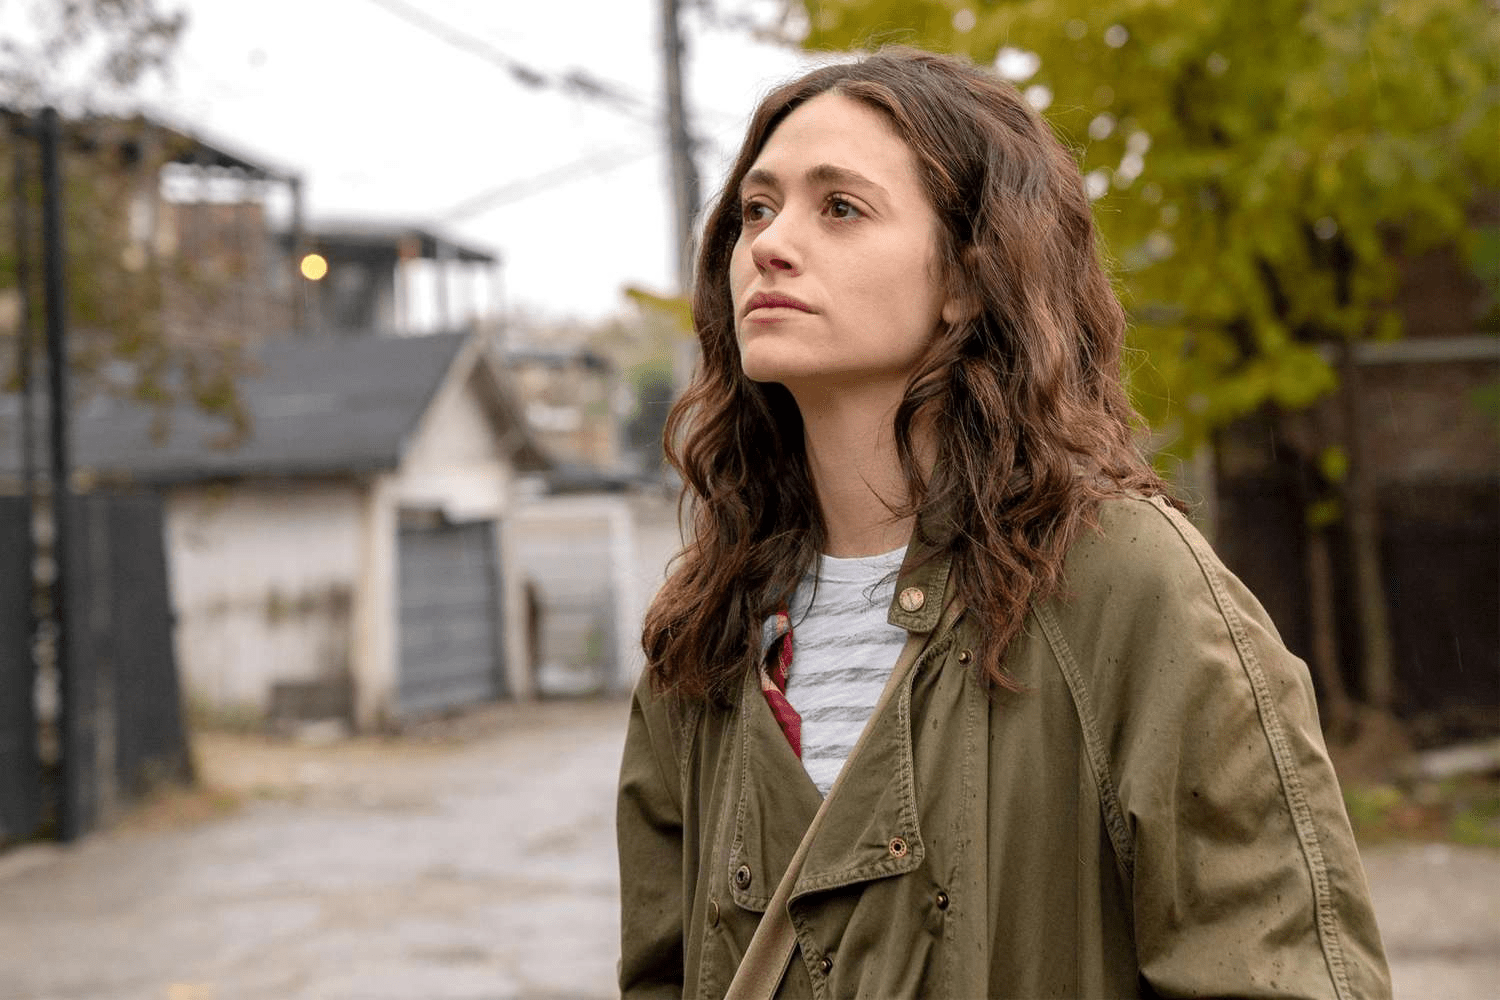 Who Does Fiona End Up With in Shameless?